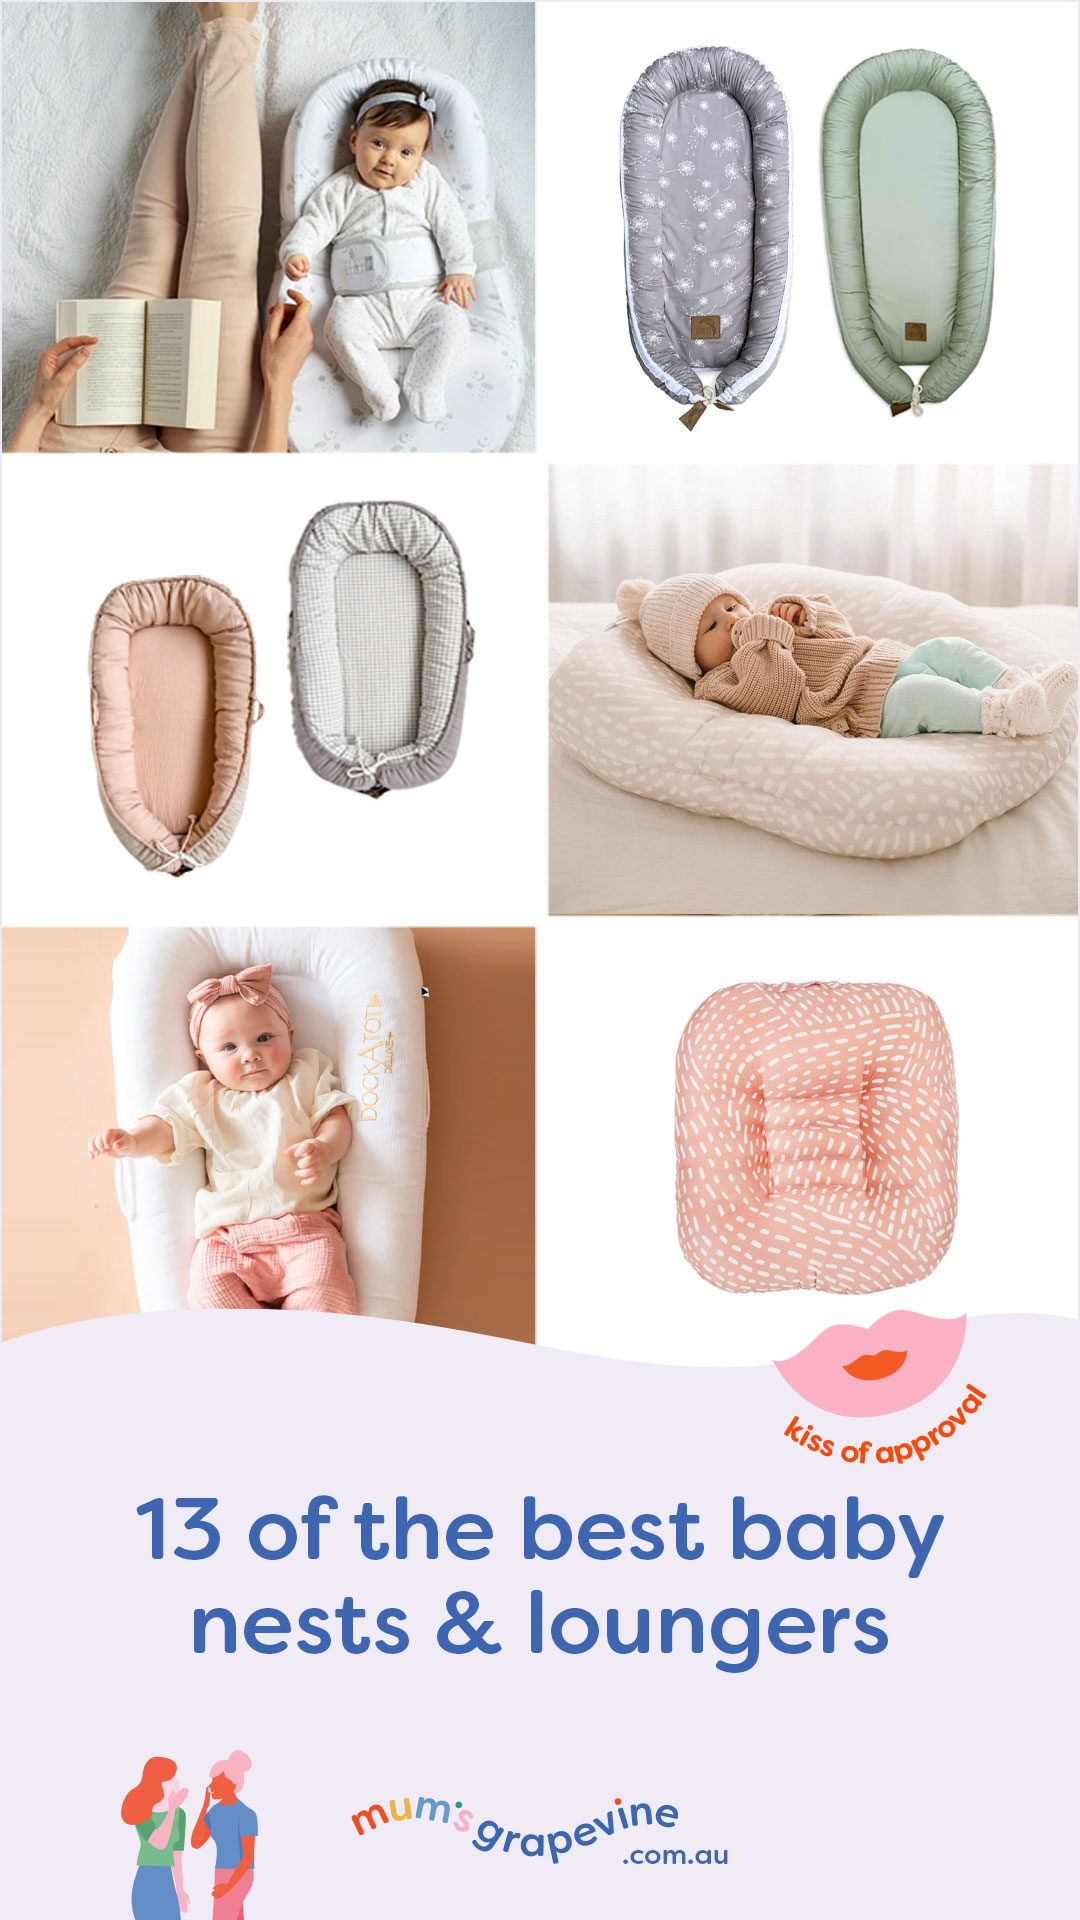 Comparision of six baby nests showing the different brands, styles, materials, prints padding and sizes.